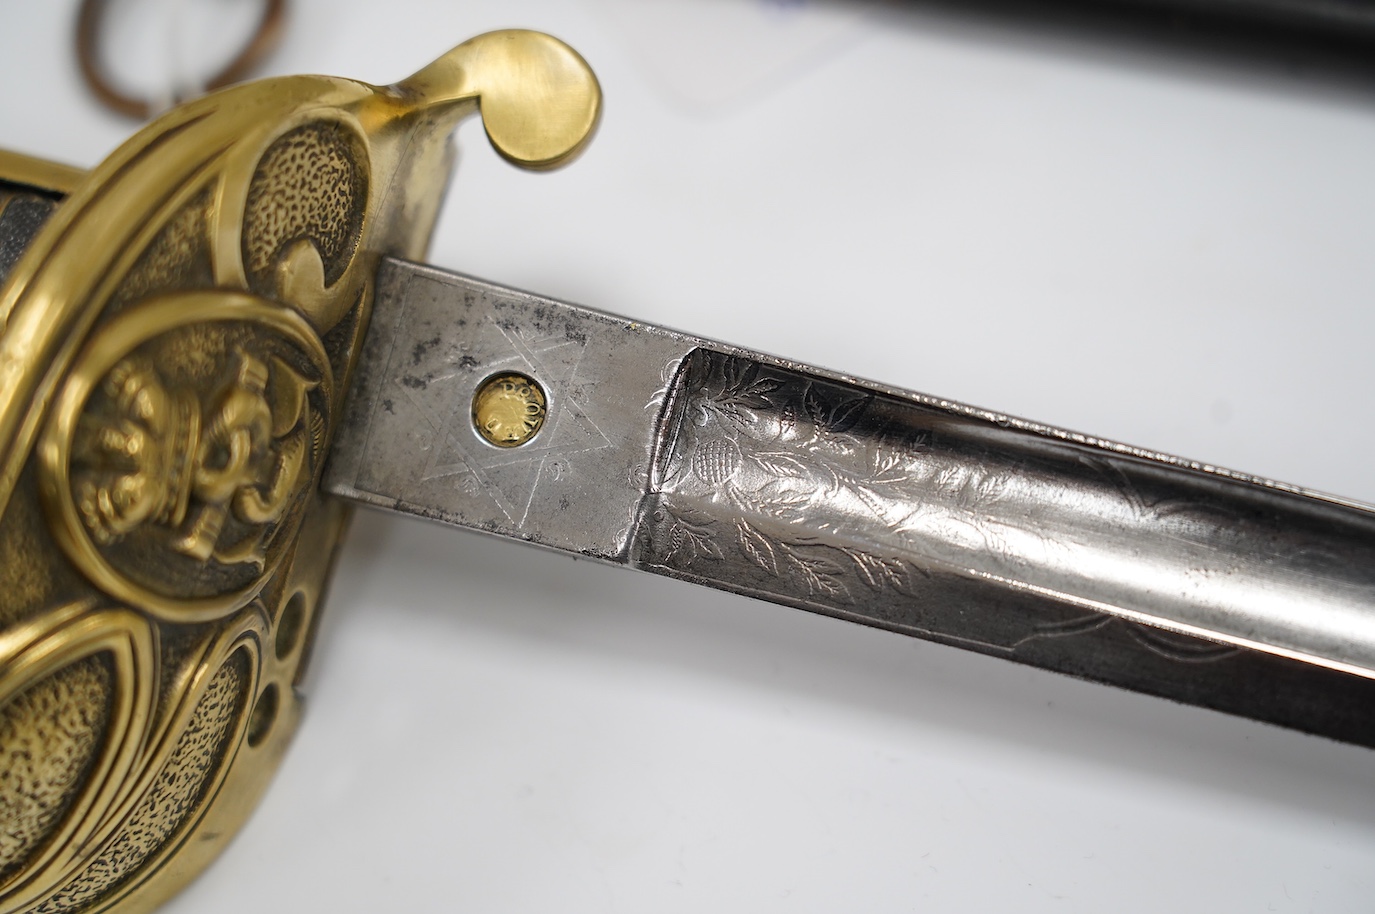 A Victorian warrant officer's sword by Westcott and Sons, regulation brass hilt, black fish skin covered grip, in its brass mounted leather scabbard, blade 79.5cm. Condition - well worn